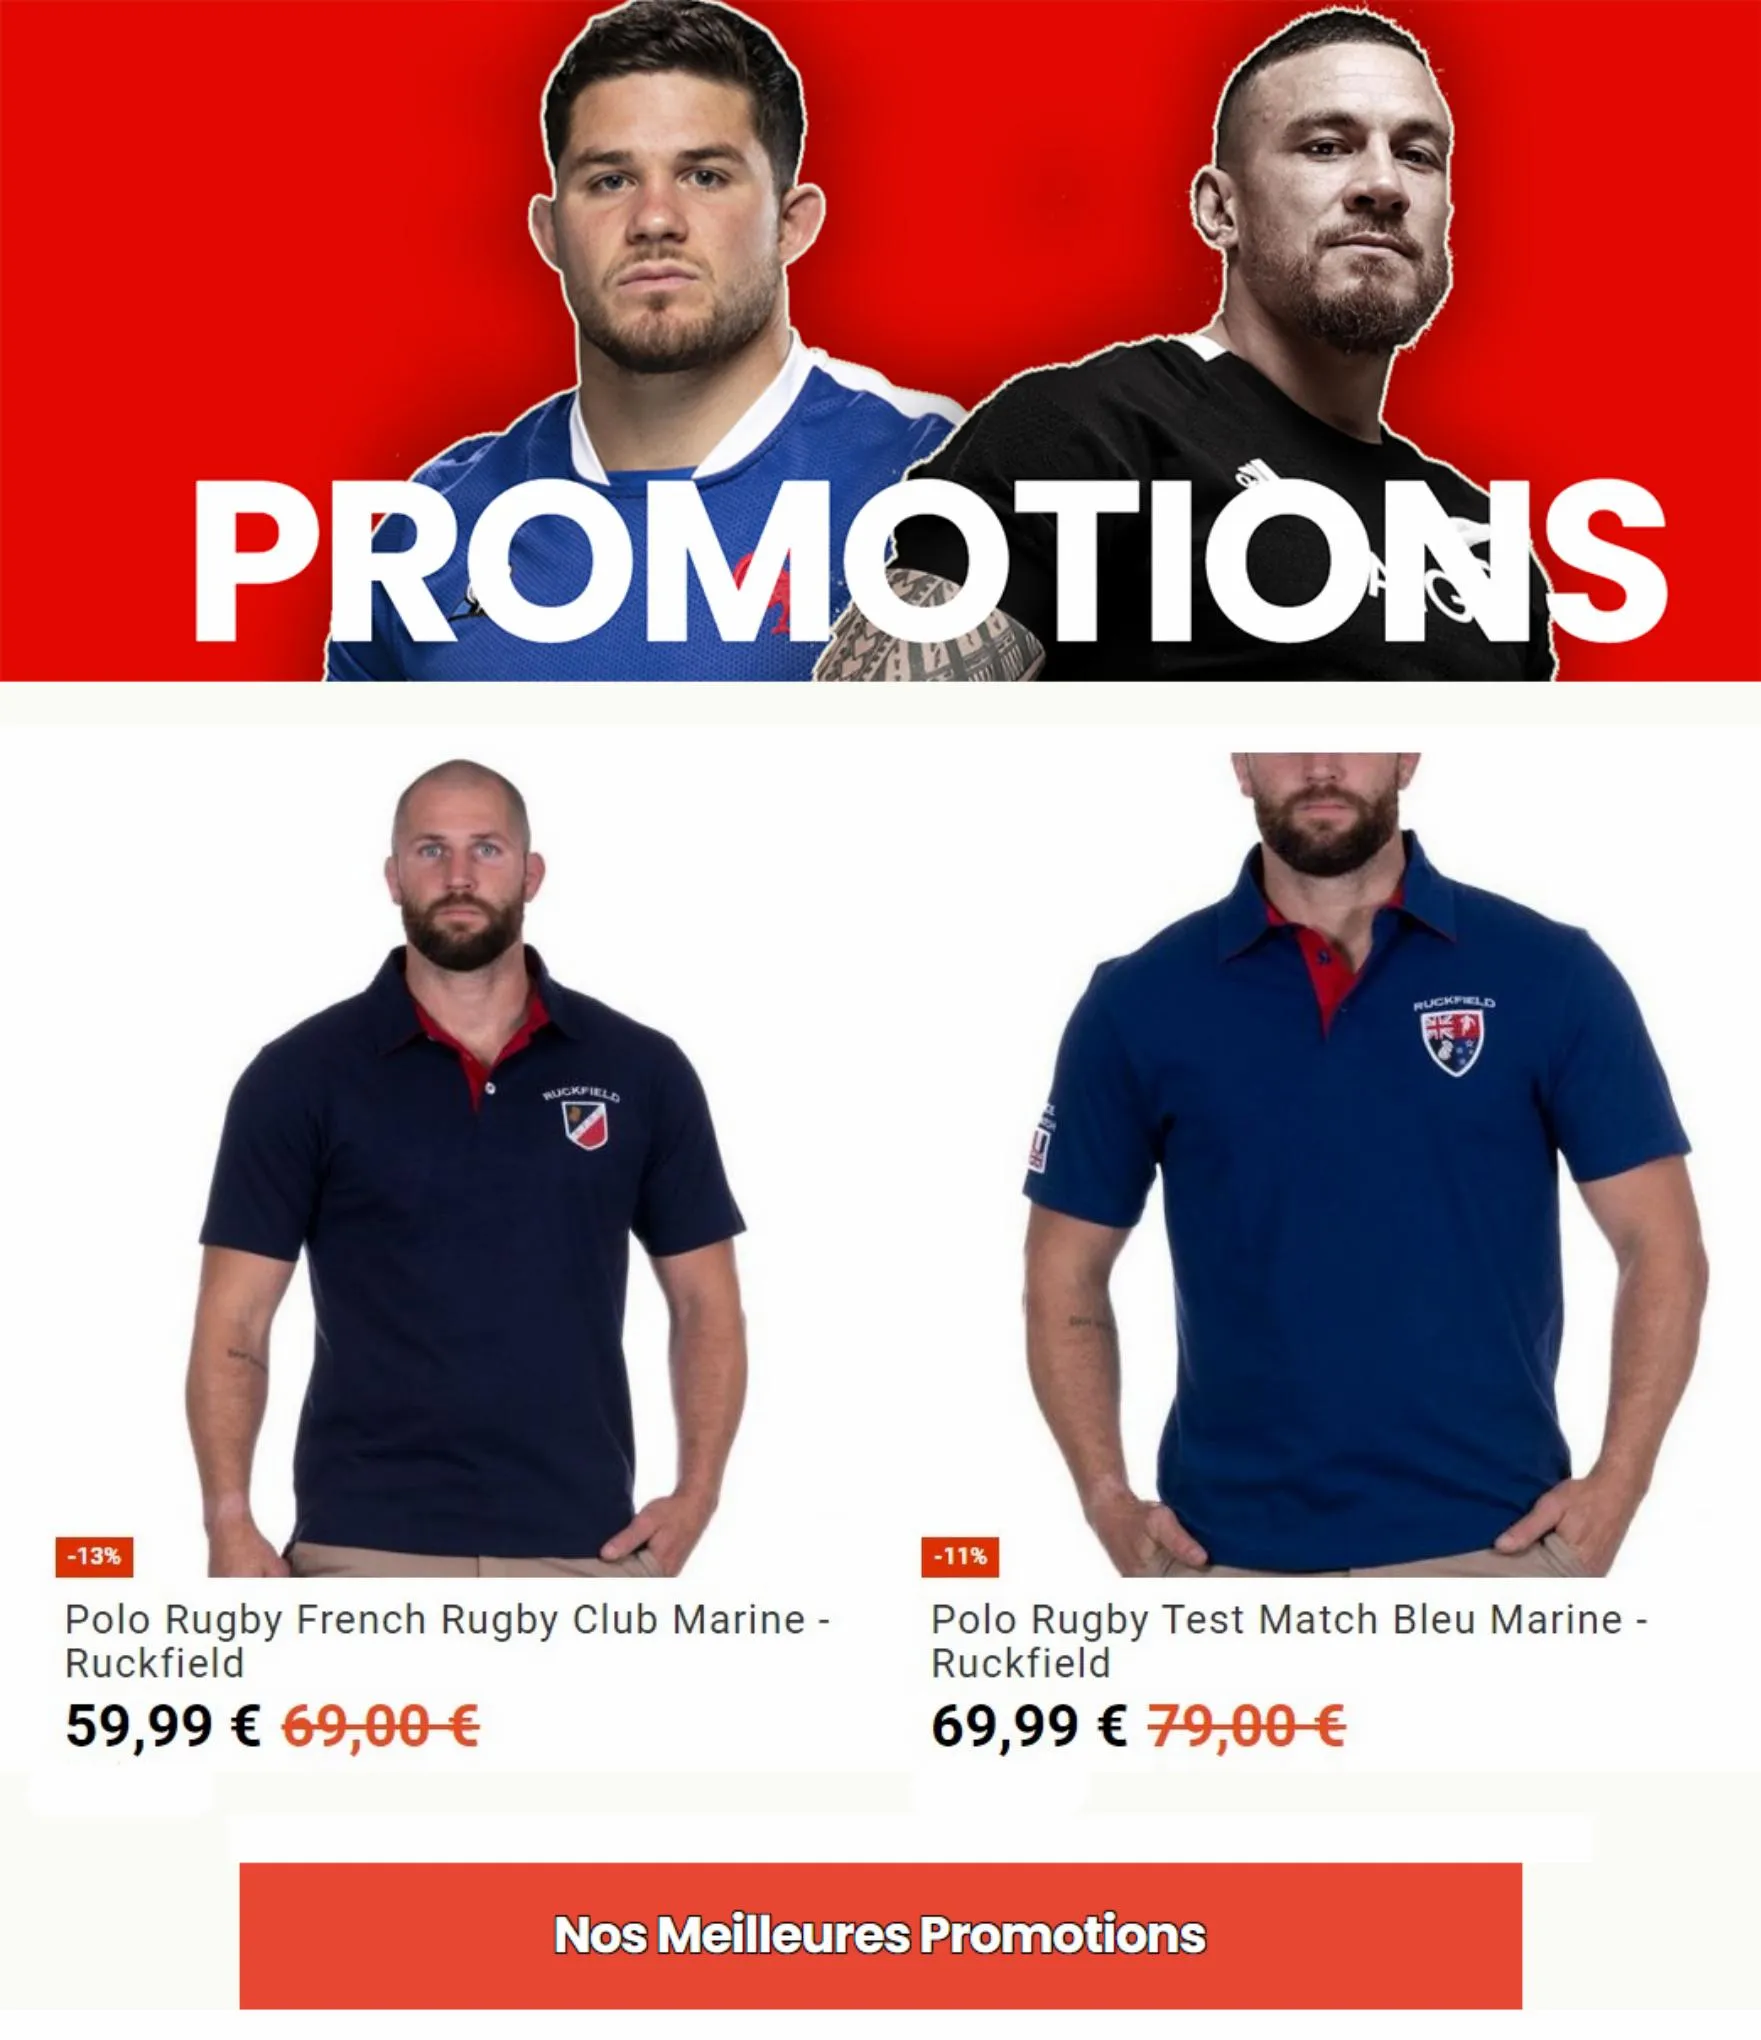 Catalogue Promotions France 2022, page 00004